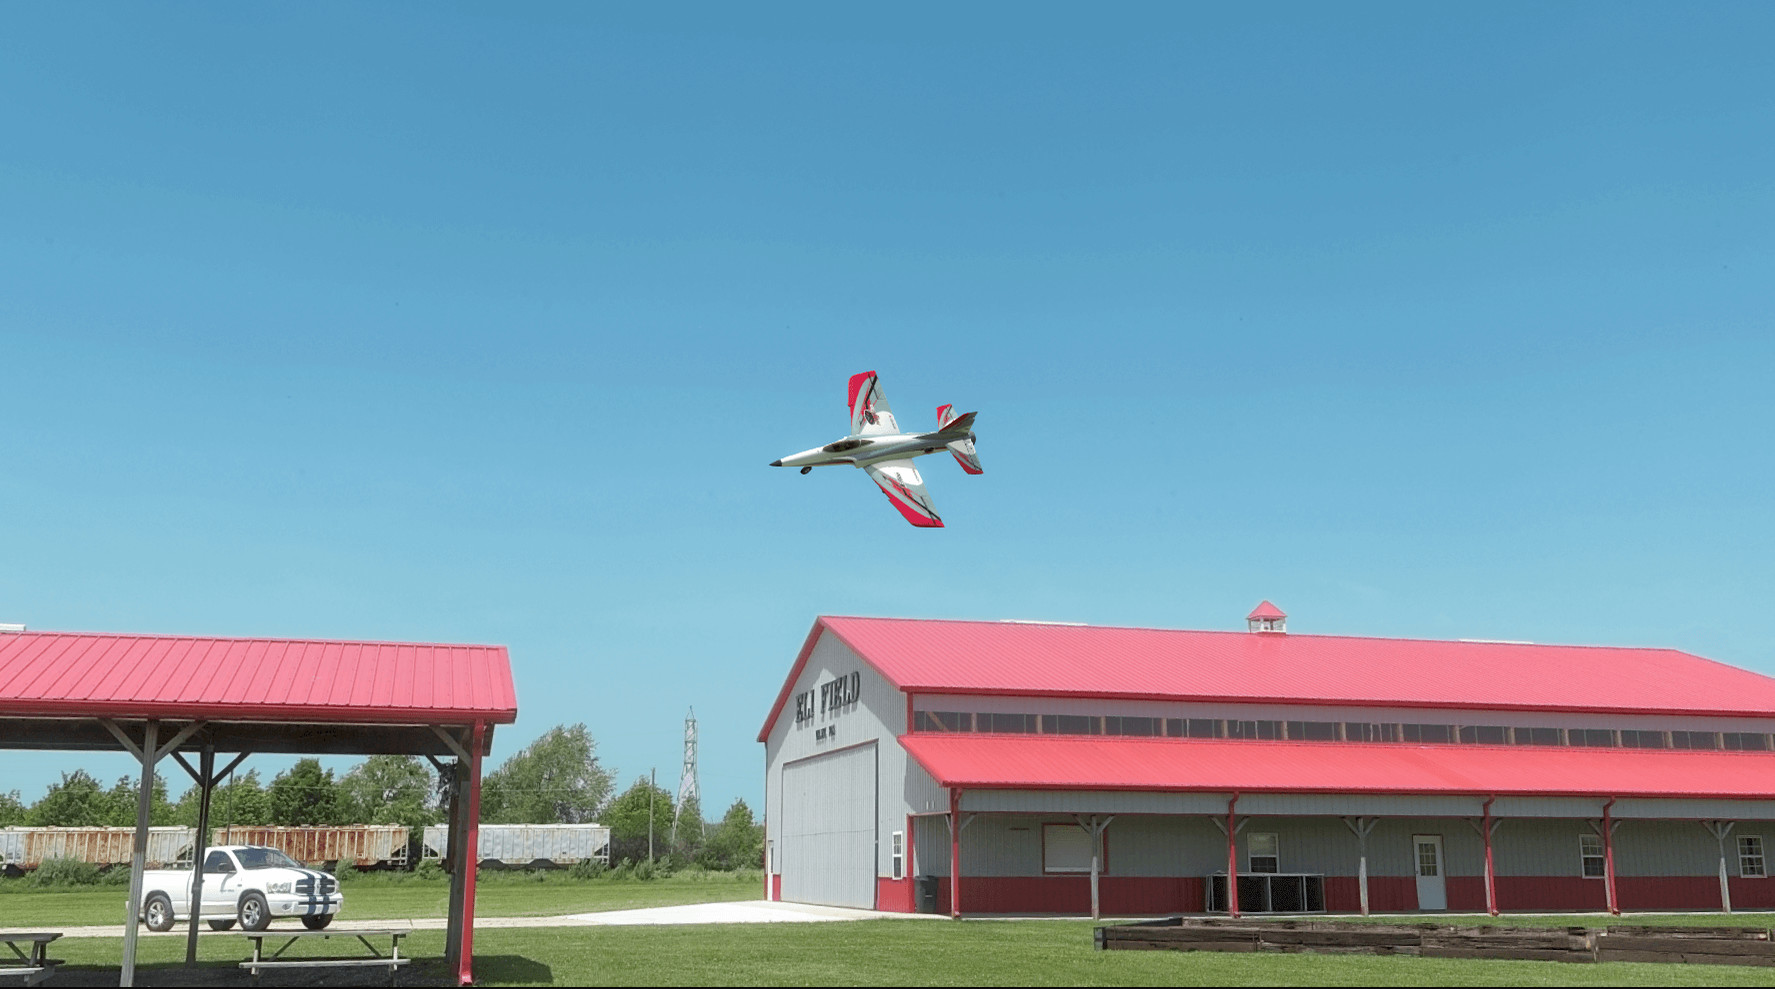 RealFlight Trainer Edition Free Download